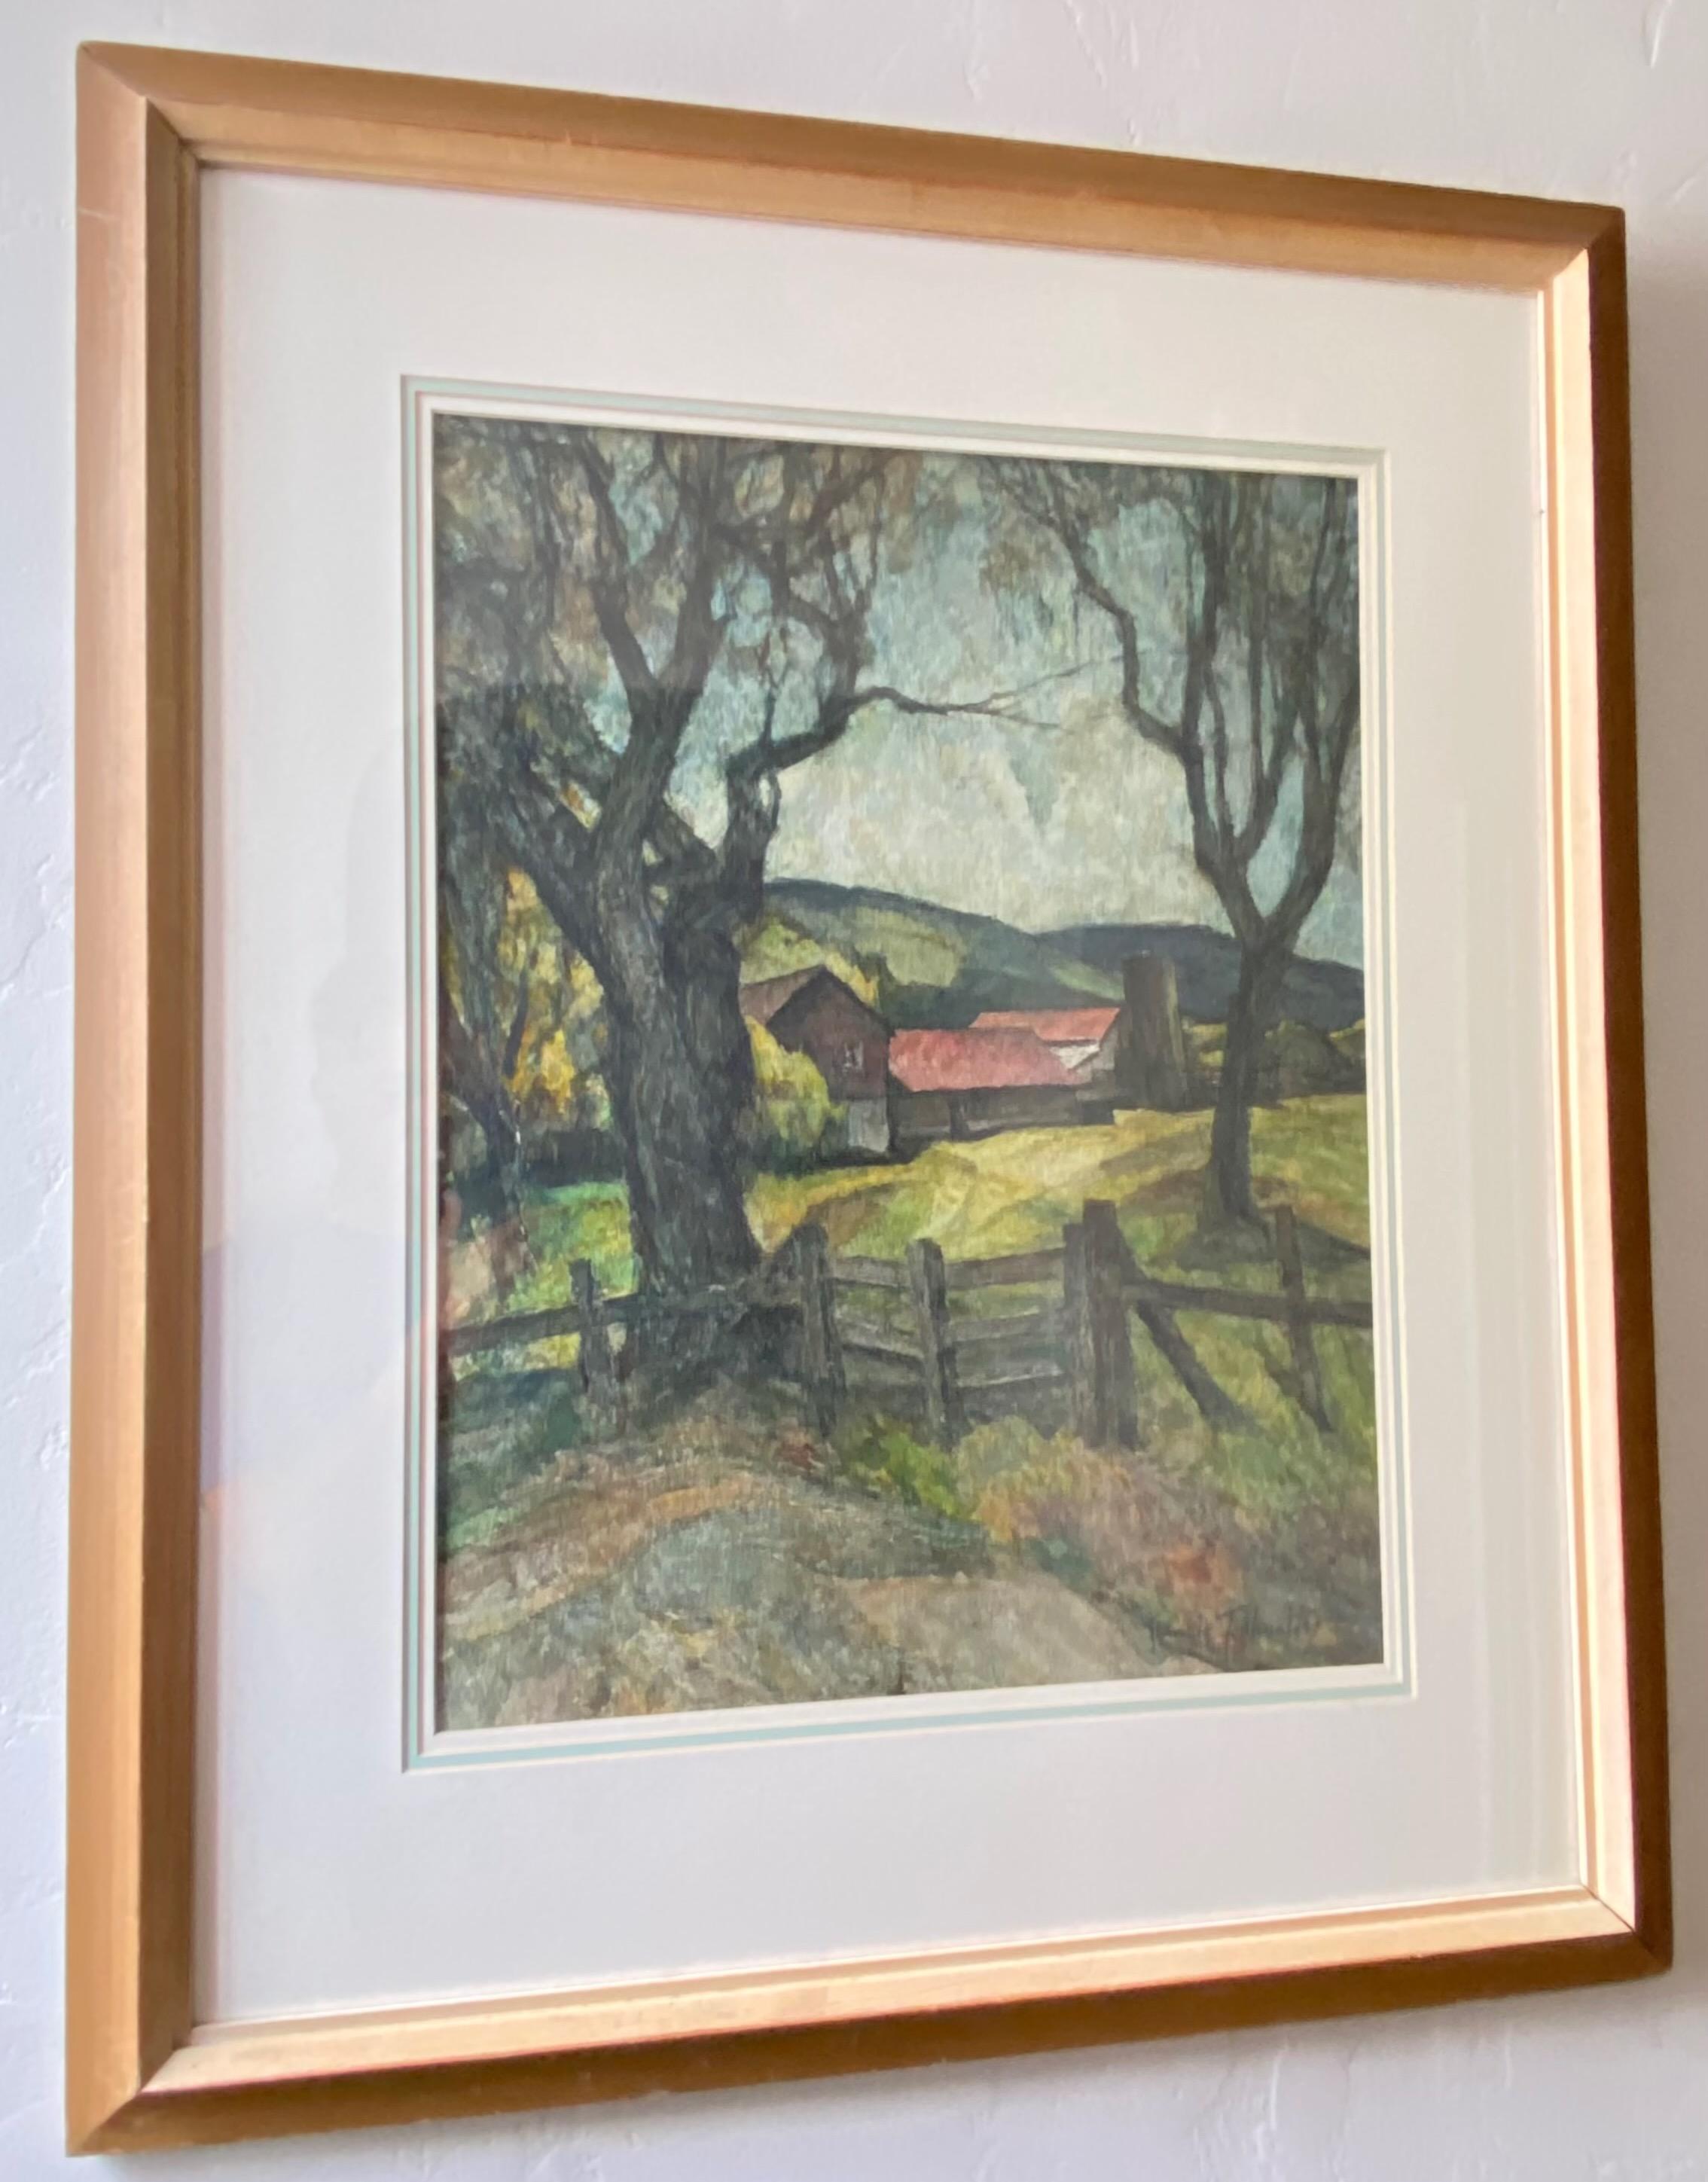 Rural landscape painting by California artist Francis Todhunter, titled 'Ranch de Novato'. This painting hung in the Bohemian Club of San Francisco.
Framed watercolor on paper behind glass.
Has original label on back.
Francis Augustus Todhunter